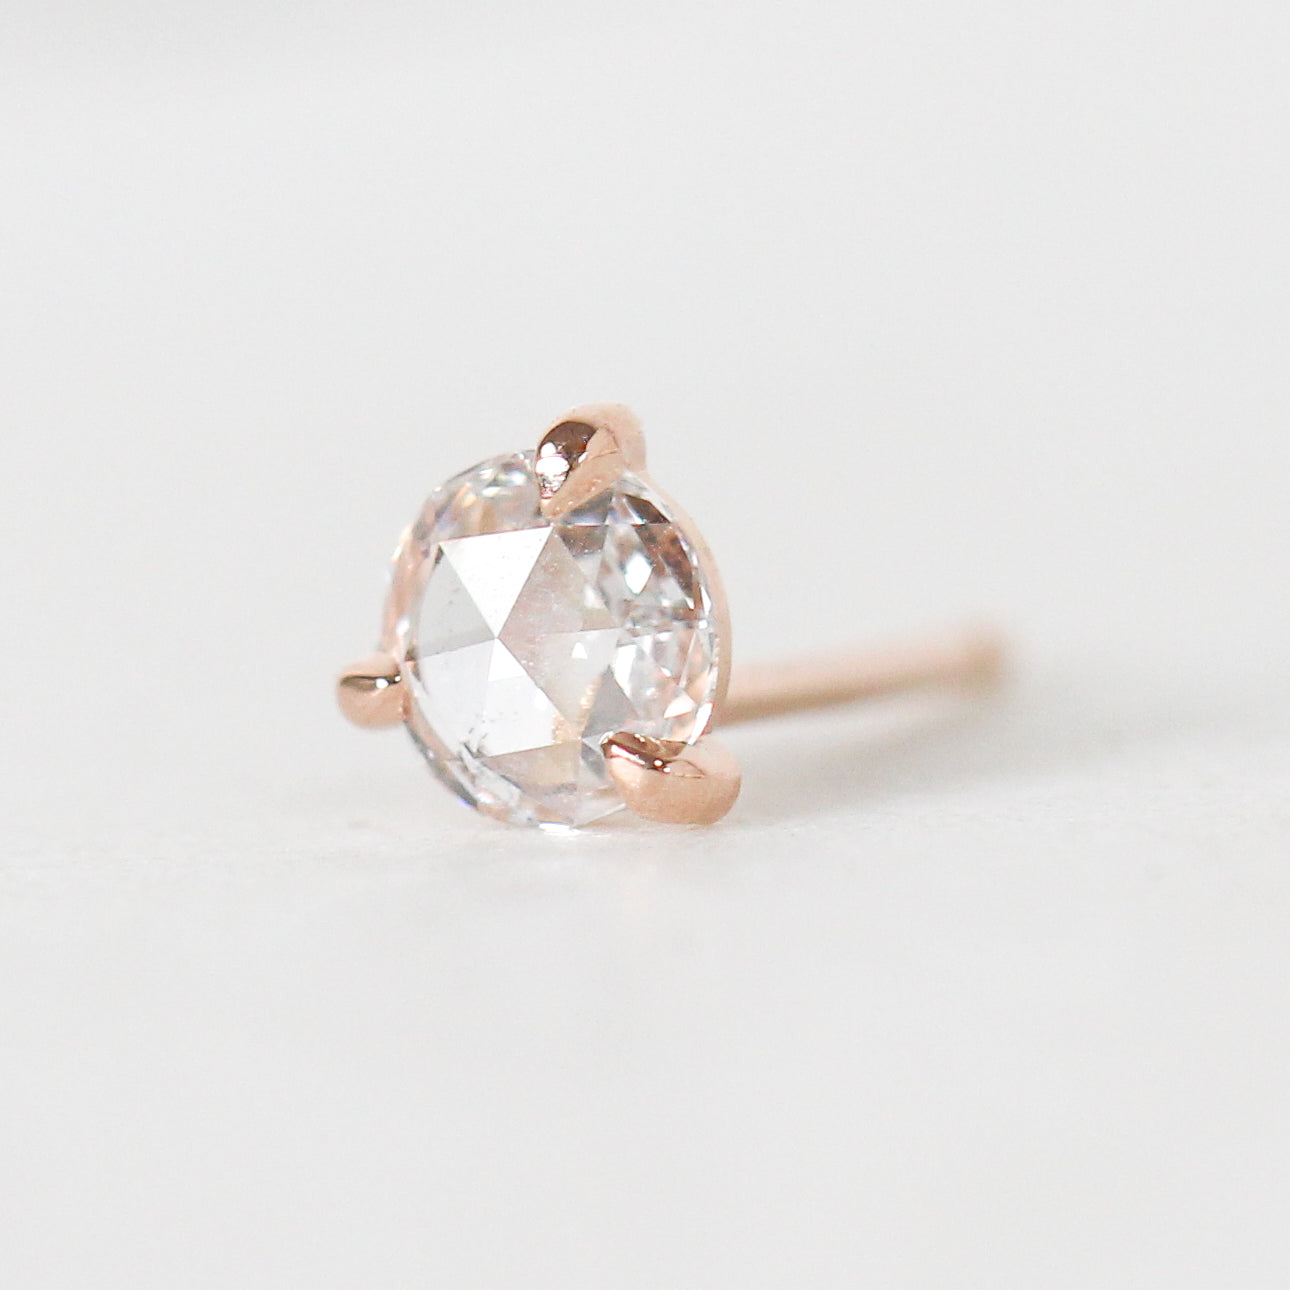 0.25 ct. Rose Cut Diamond Earring Studs  in 14K Rose or Yellow Gold - Ready to Ship - Midwinter Co. Alternative Bridal Rings and Modern Fine Jewelry